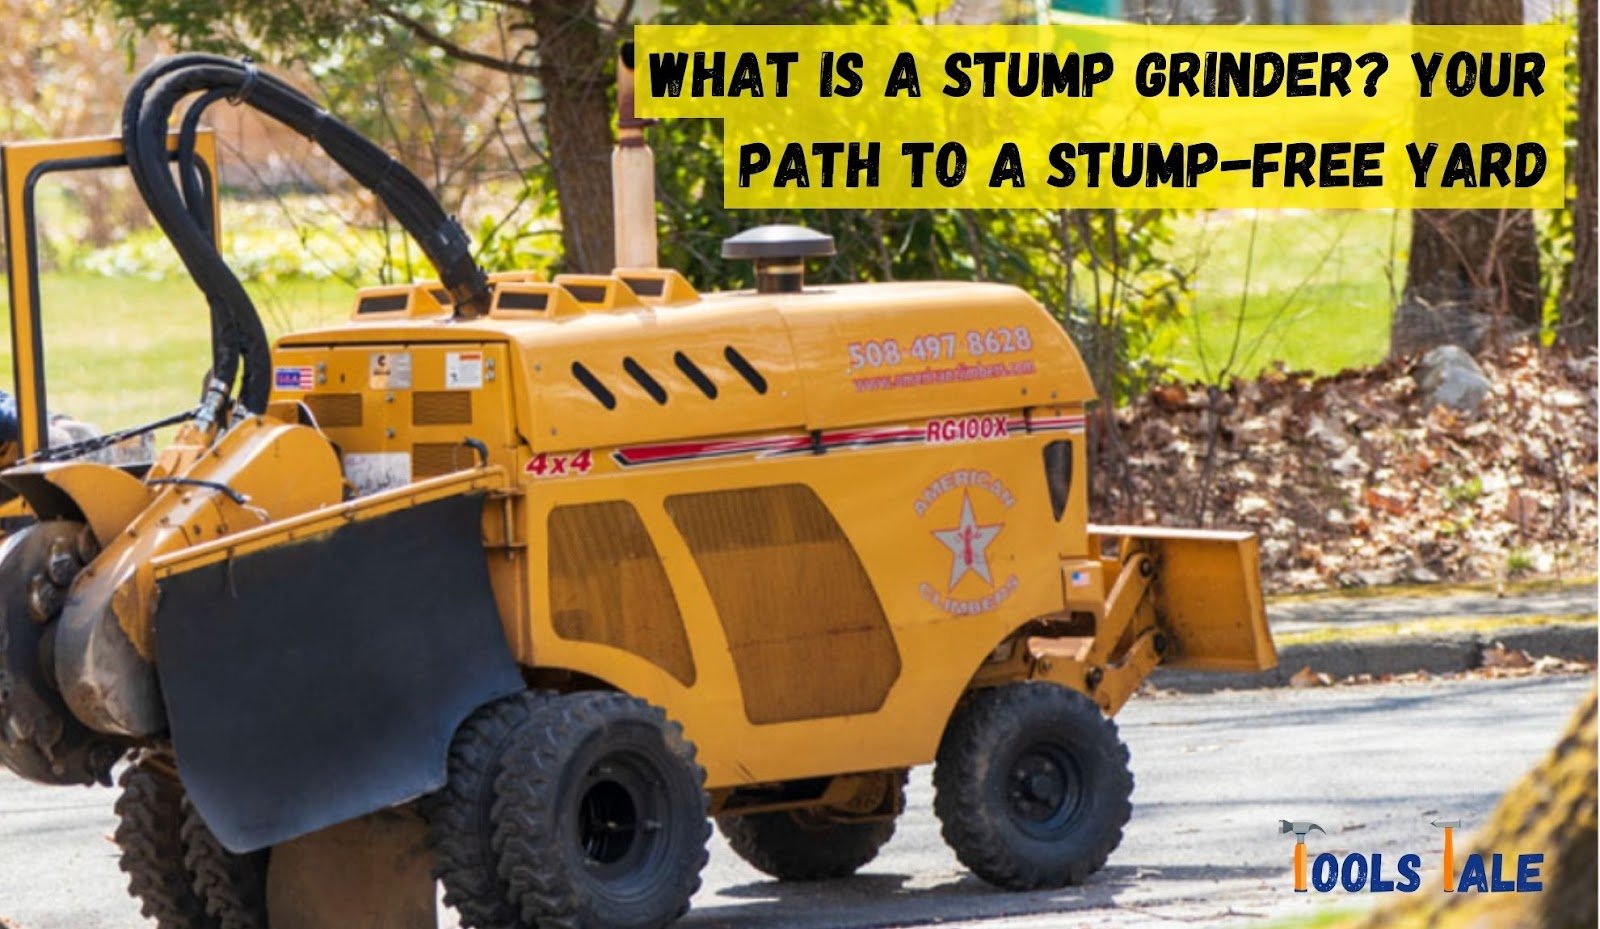 What is a stump grinder